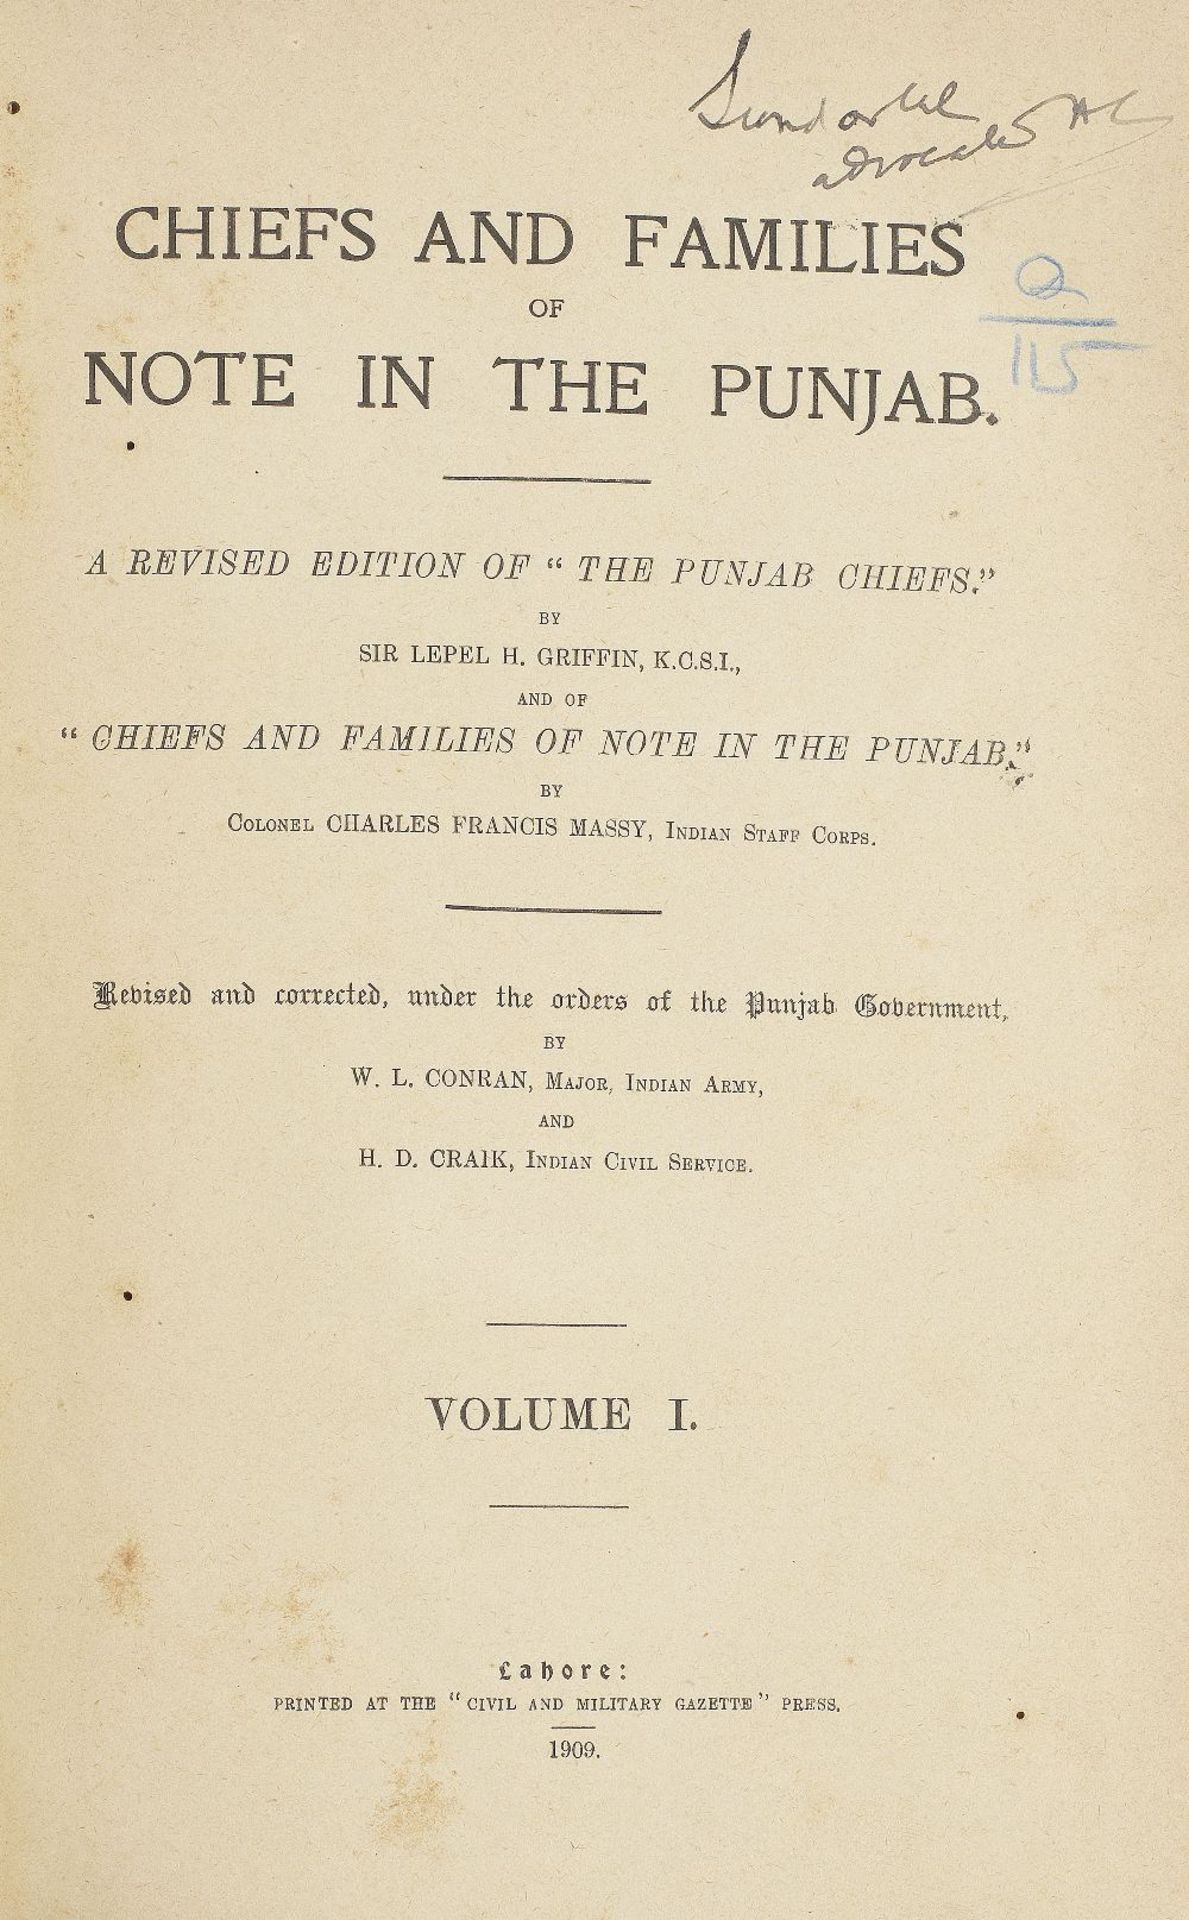 Chiefs and Families of Note in the Punjab, by Sir Lepel H. Griffin and Col. C. F. Massy, 3 vols....